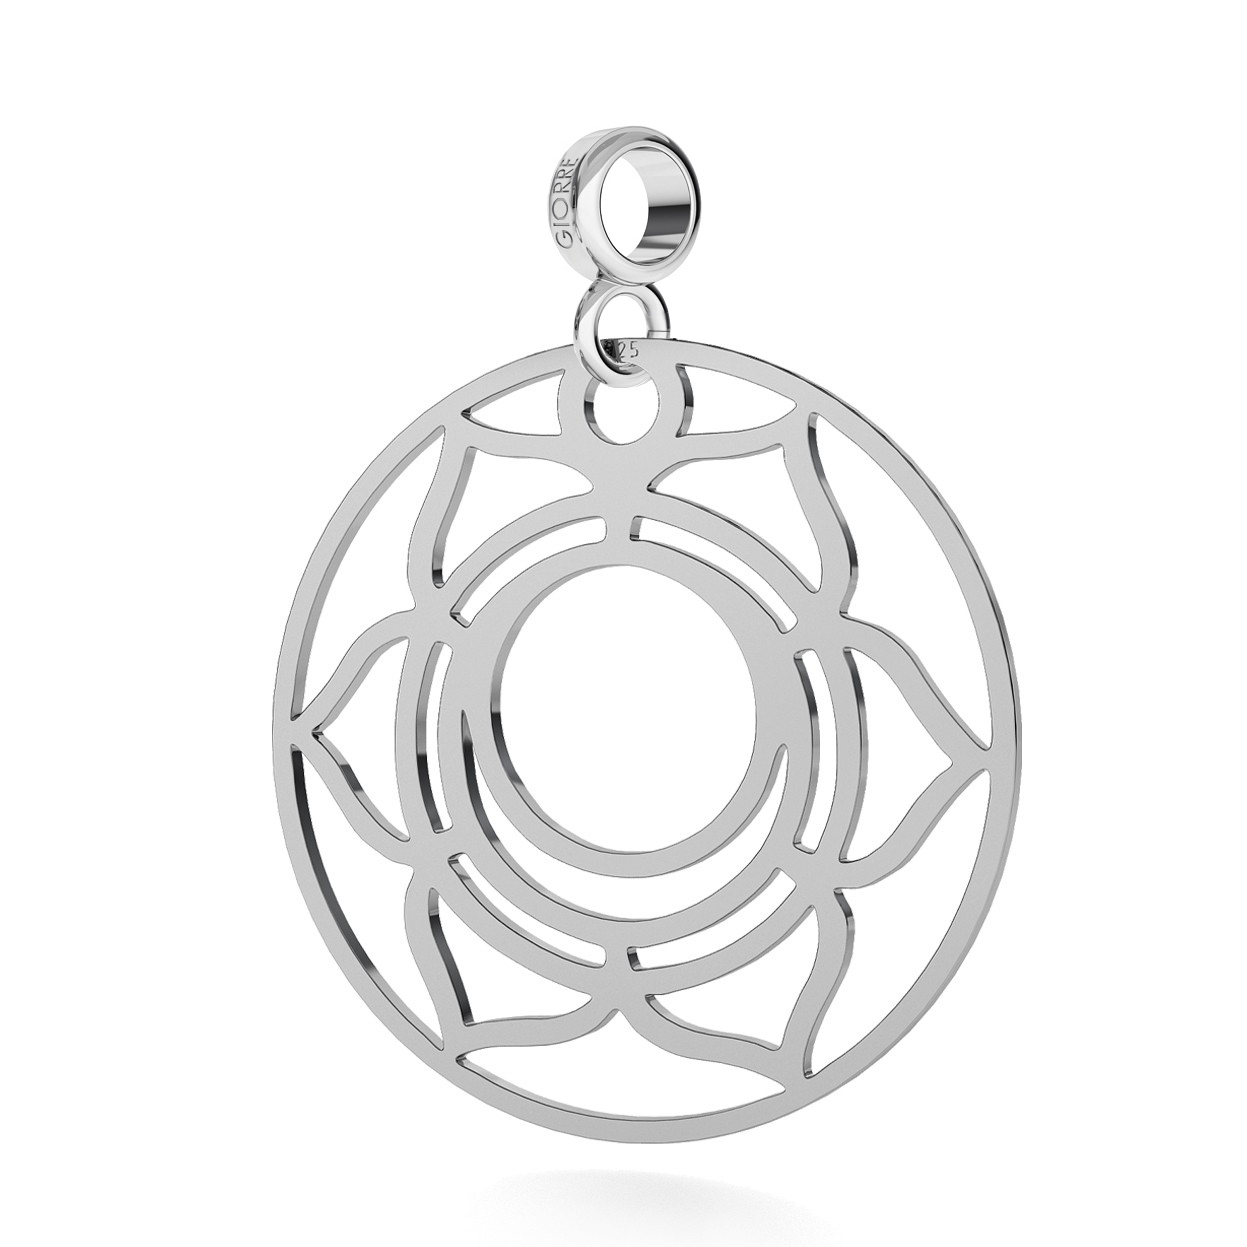 CHARM 73, SACRAL CHAKRA, STERLING SILVER (925) RHODIUM OR GOLD PLATED